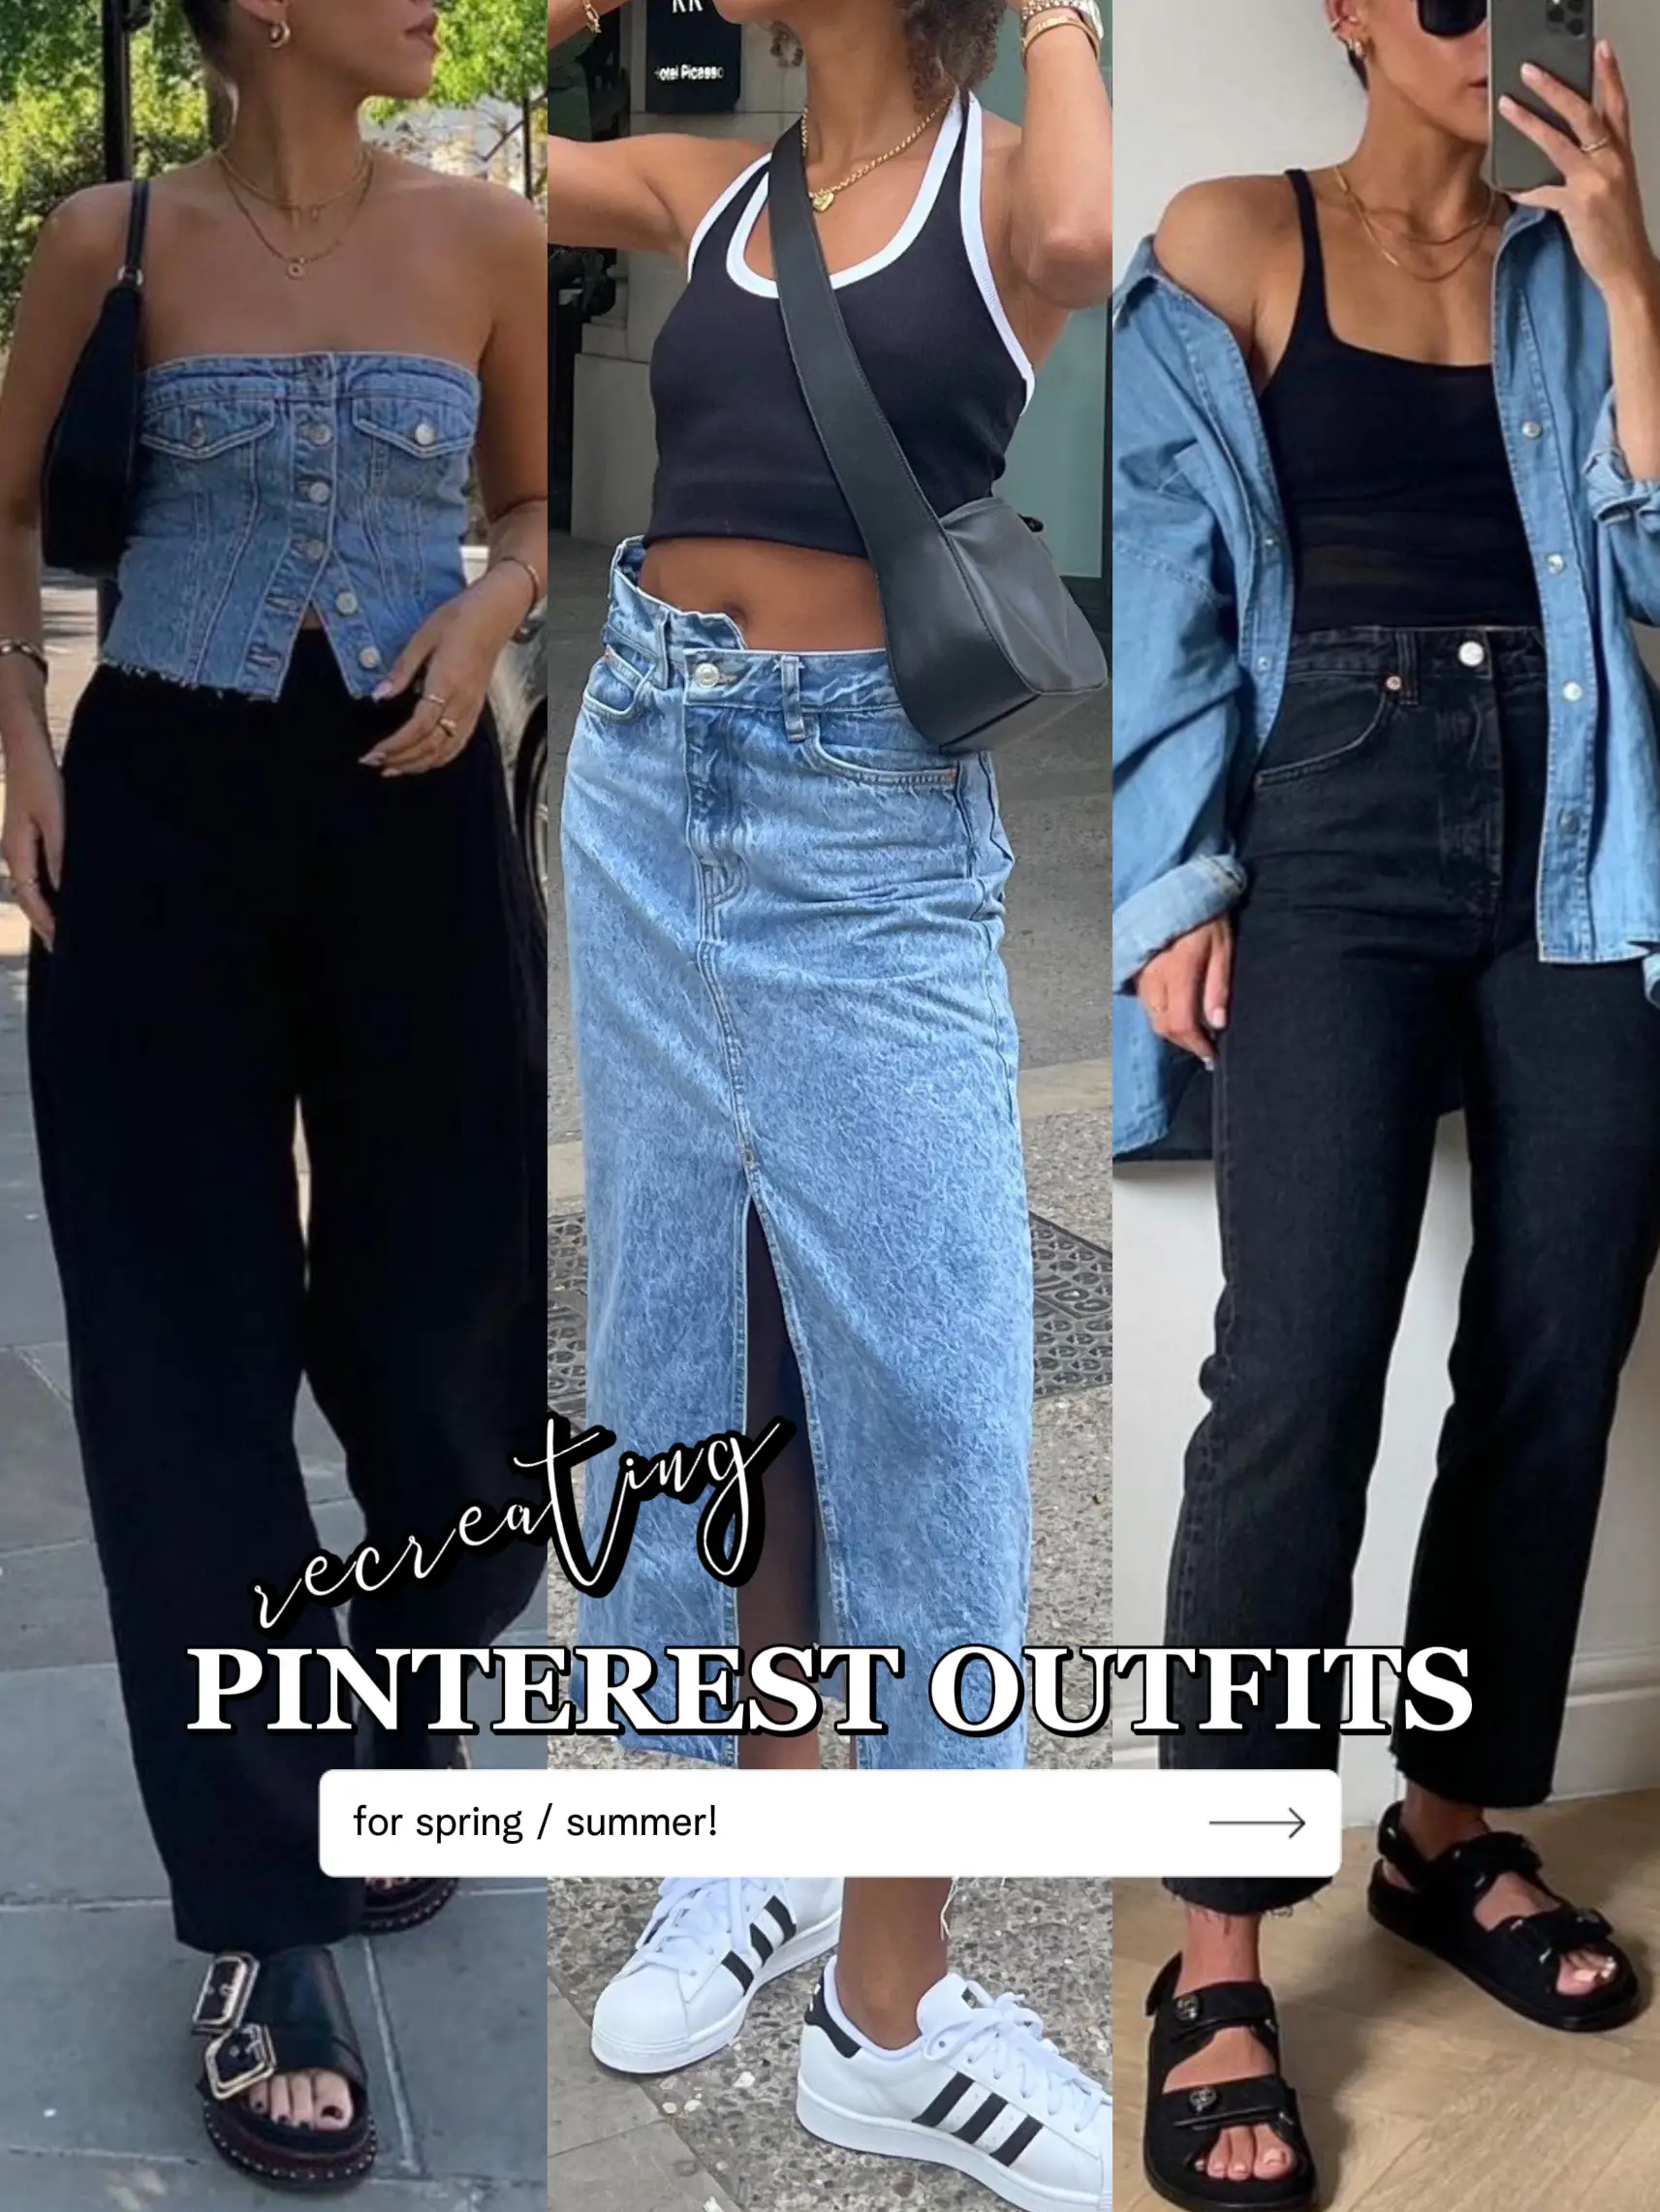 3 pinterest outfits that are easy to recreate ☀️